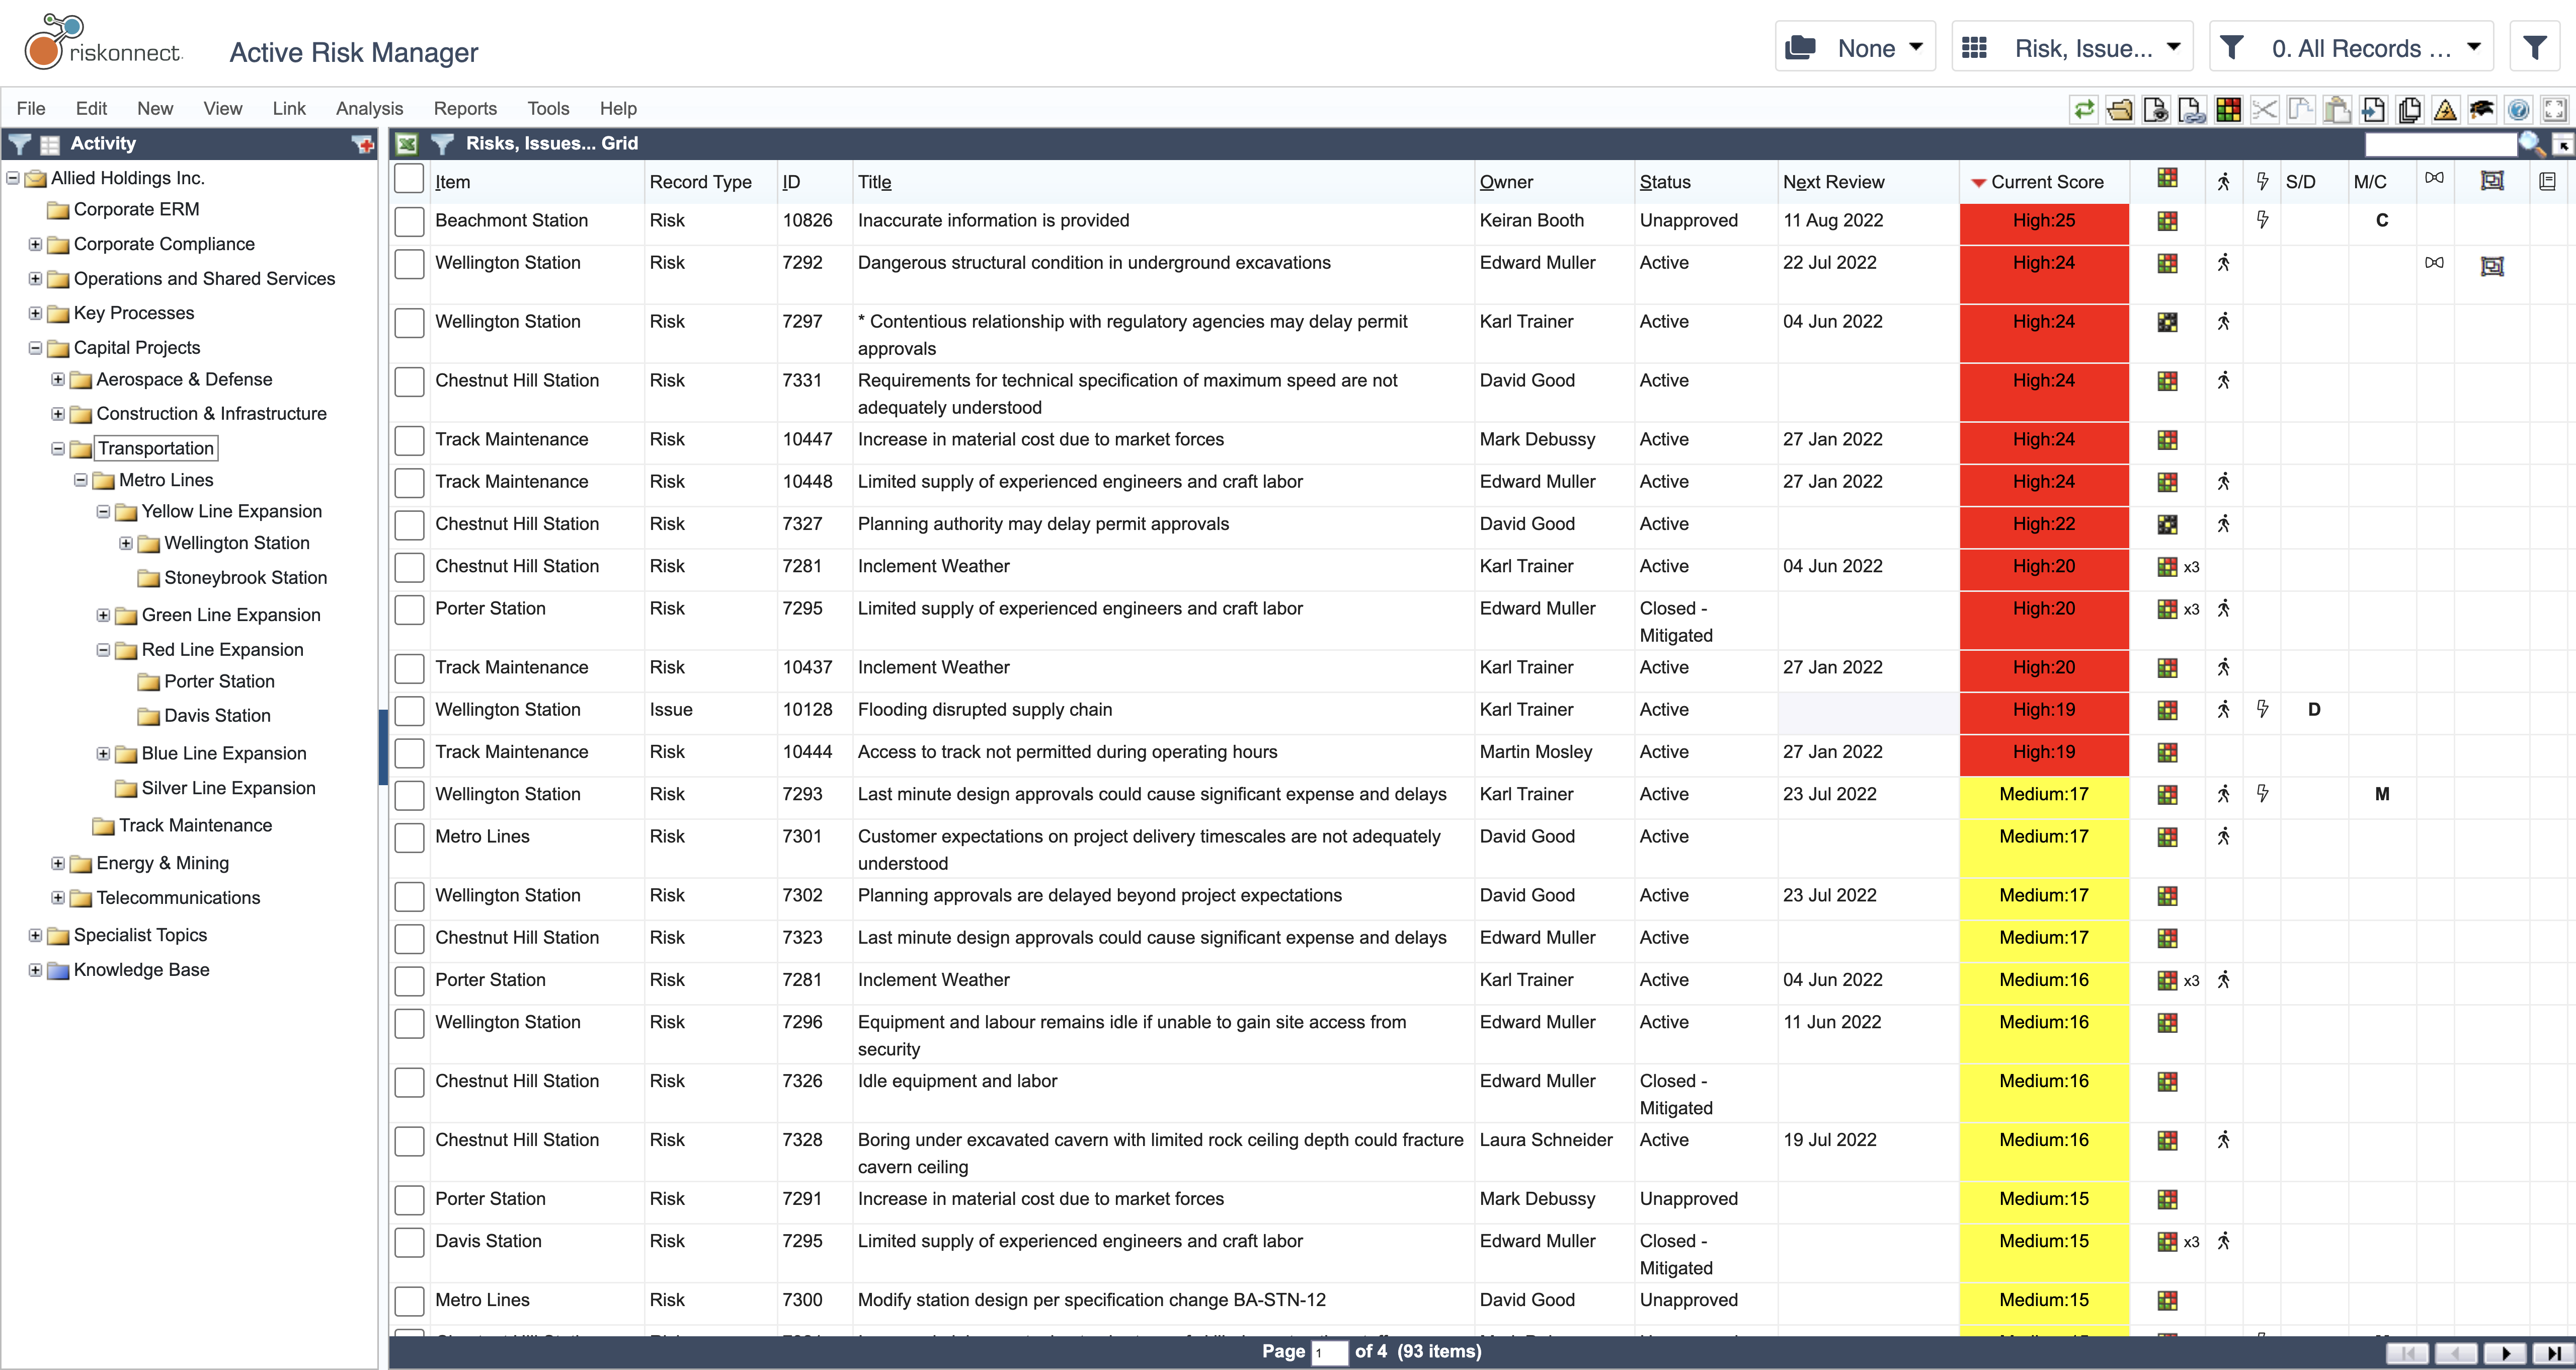 Project Risk Management's risk manager interface